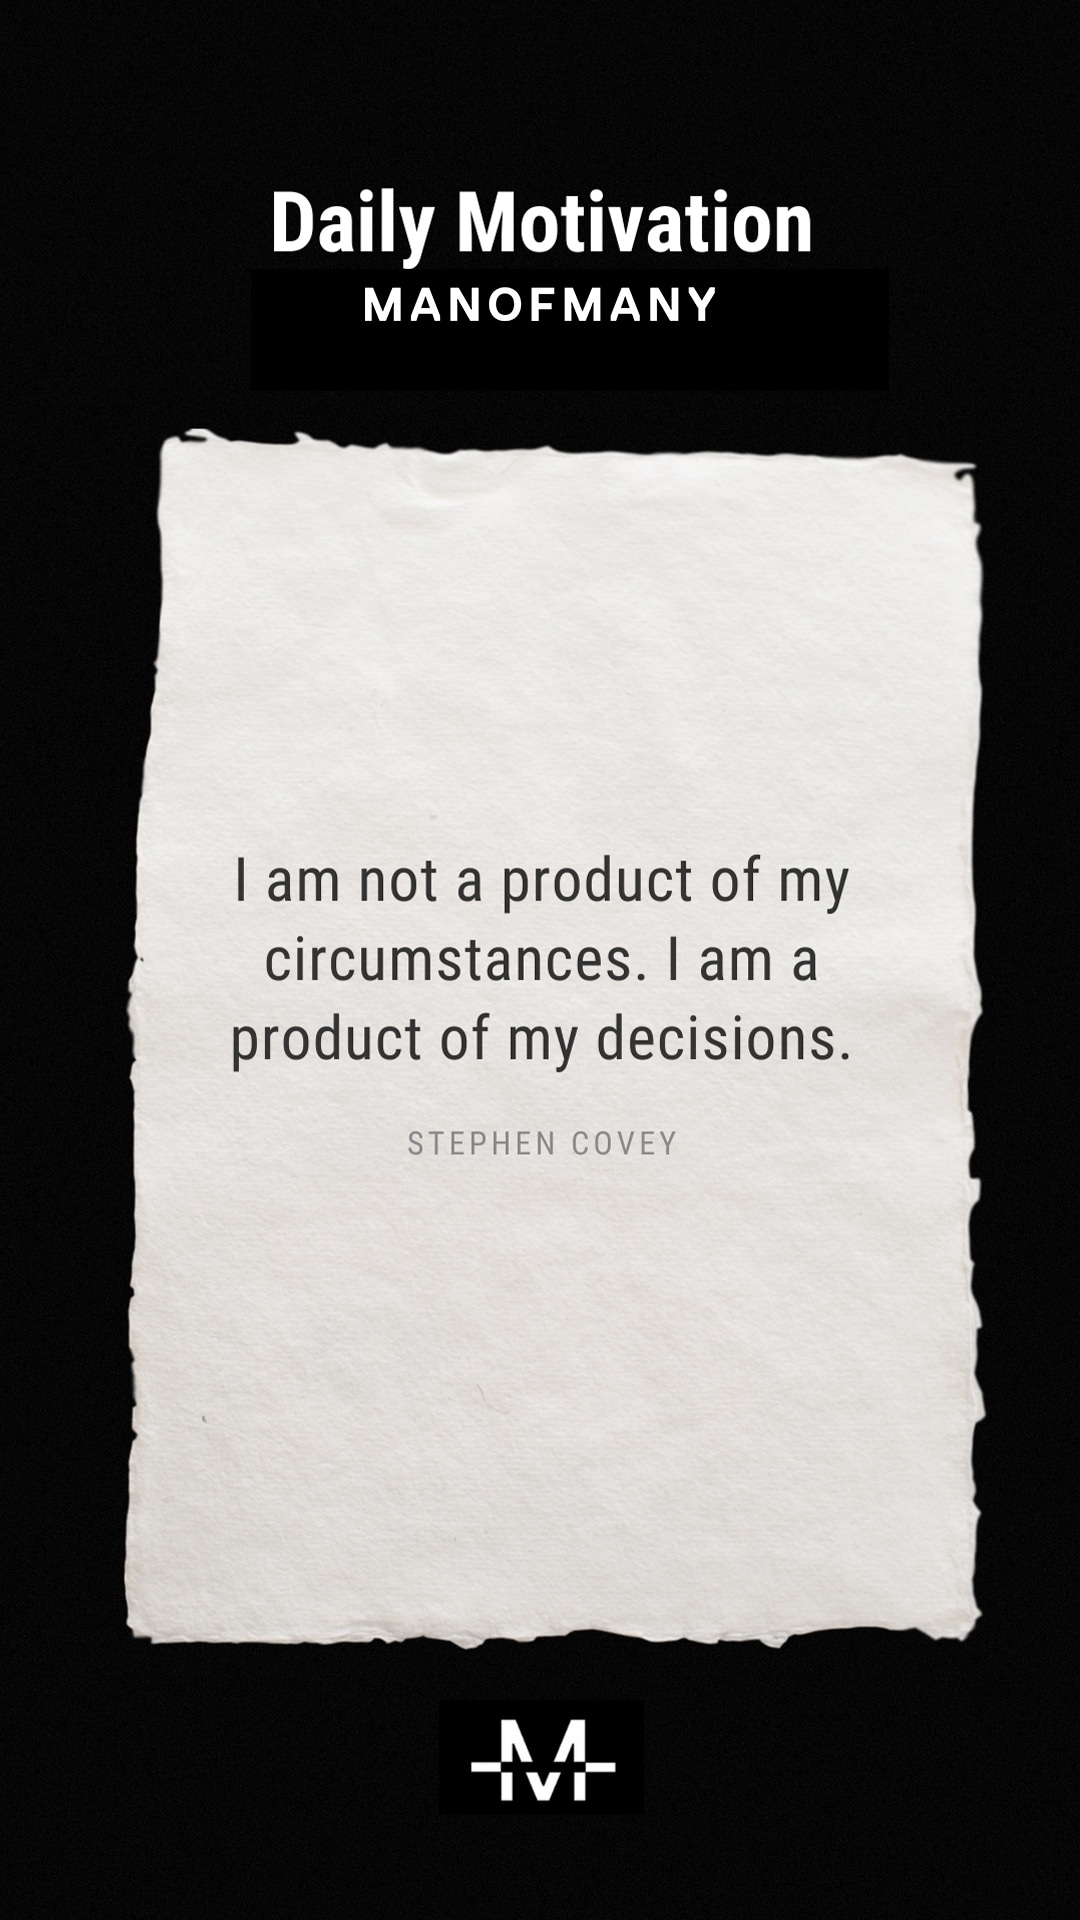 I am not a product of my circumstances. I am a product of my decisions. –Stephen Covey quote